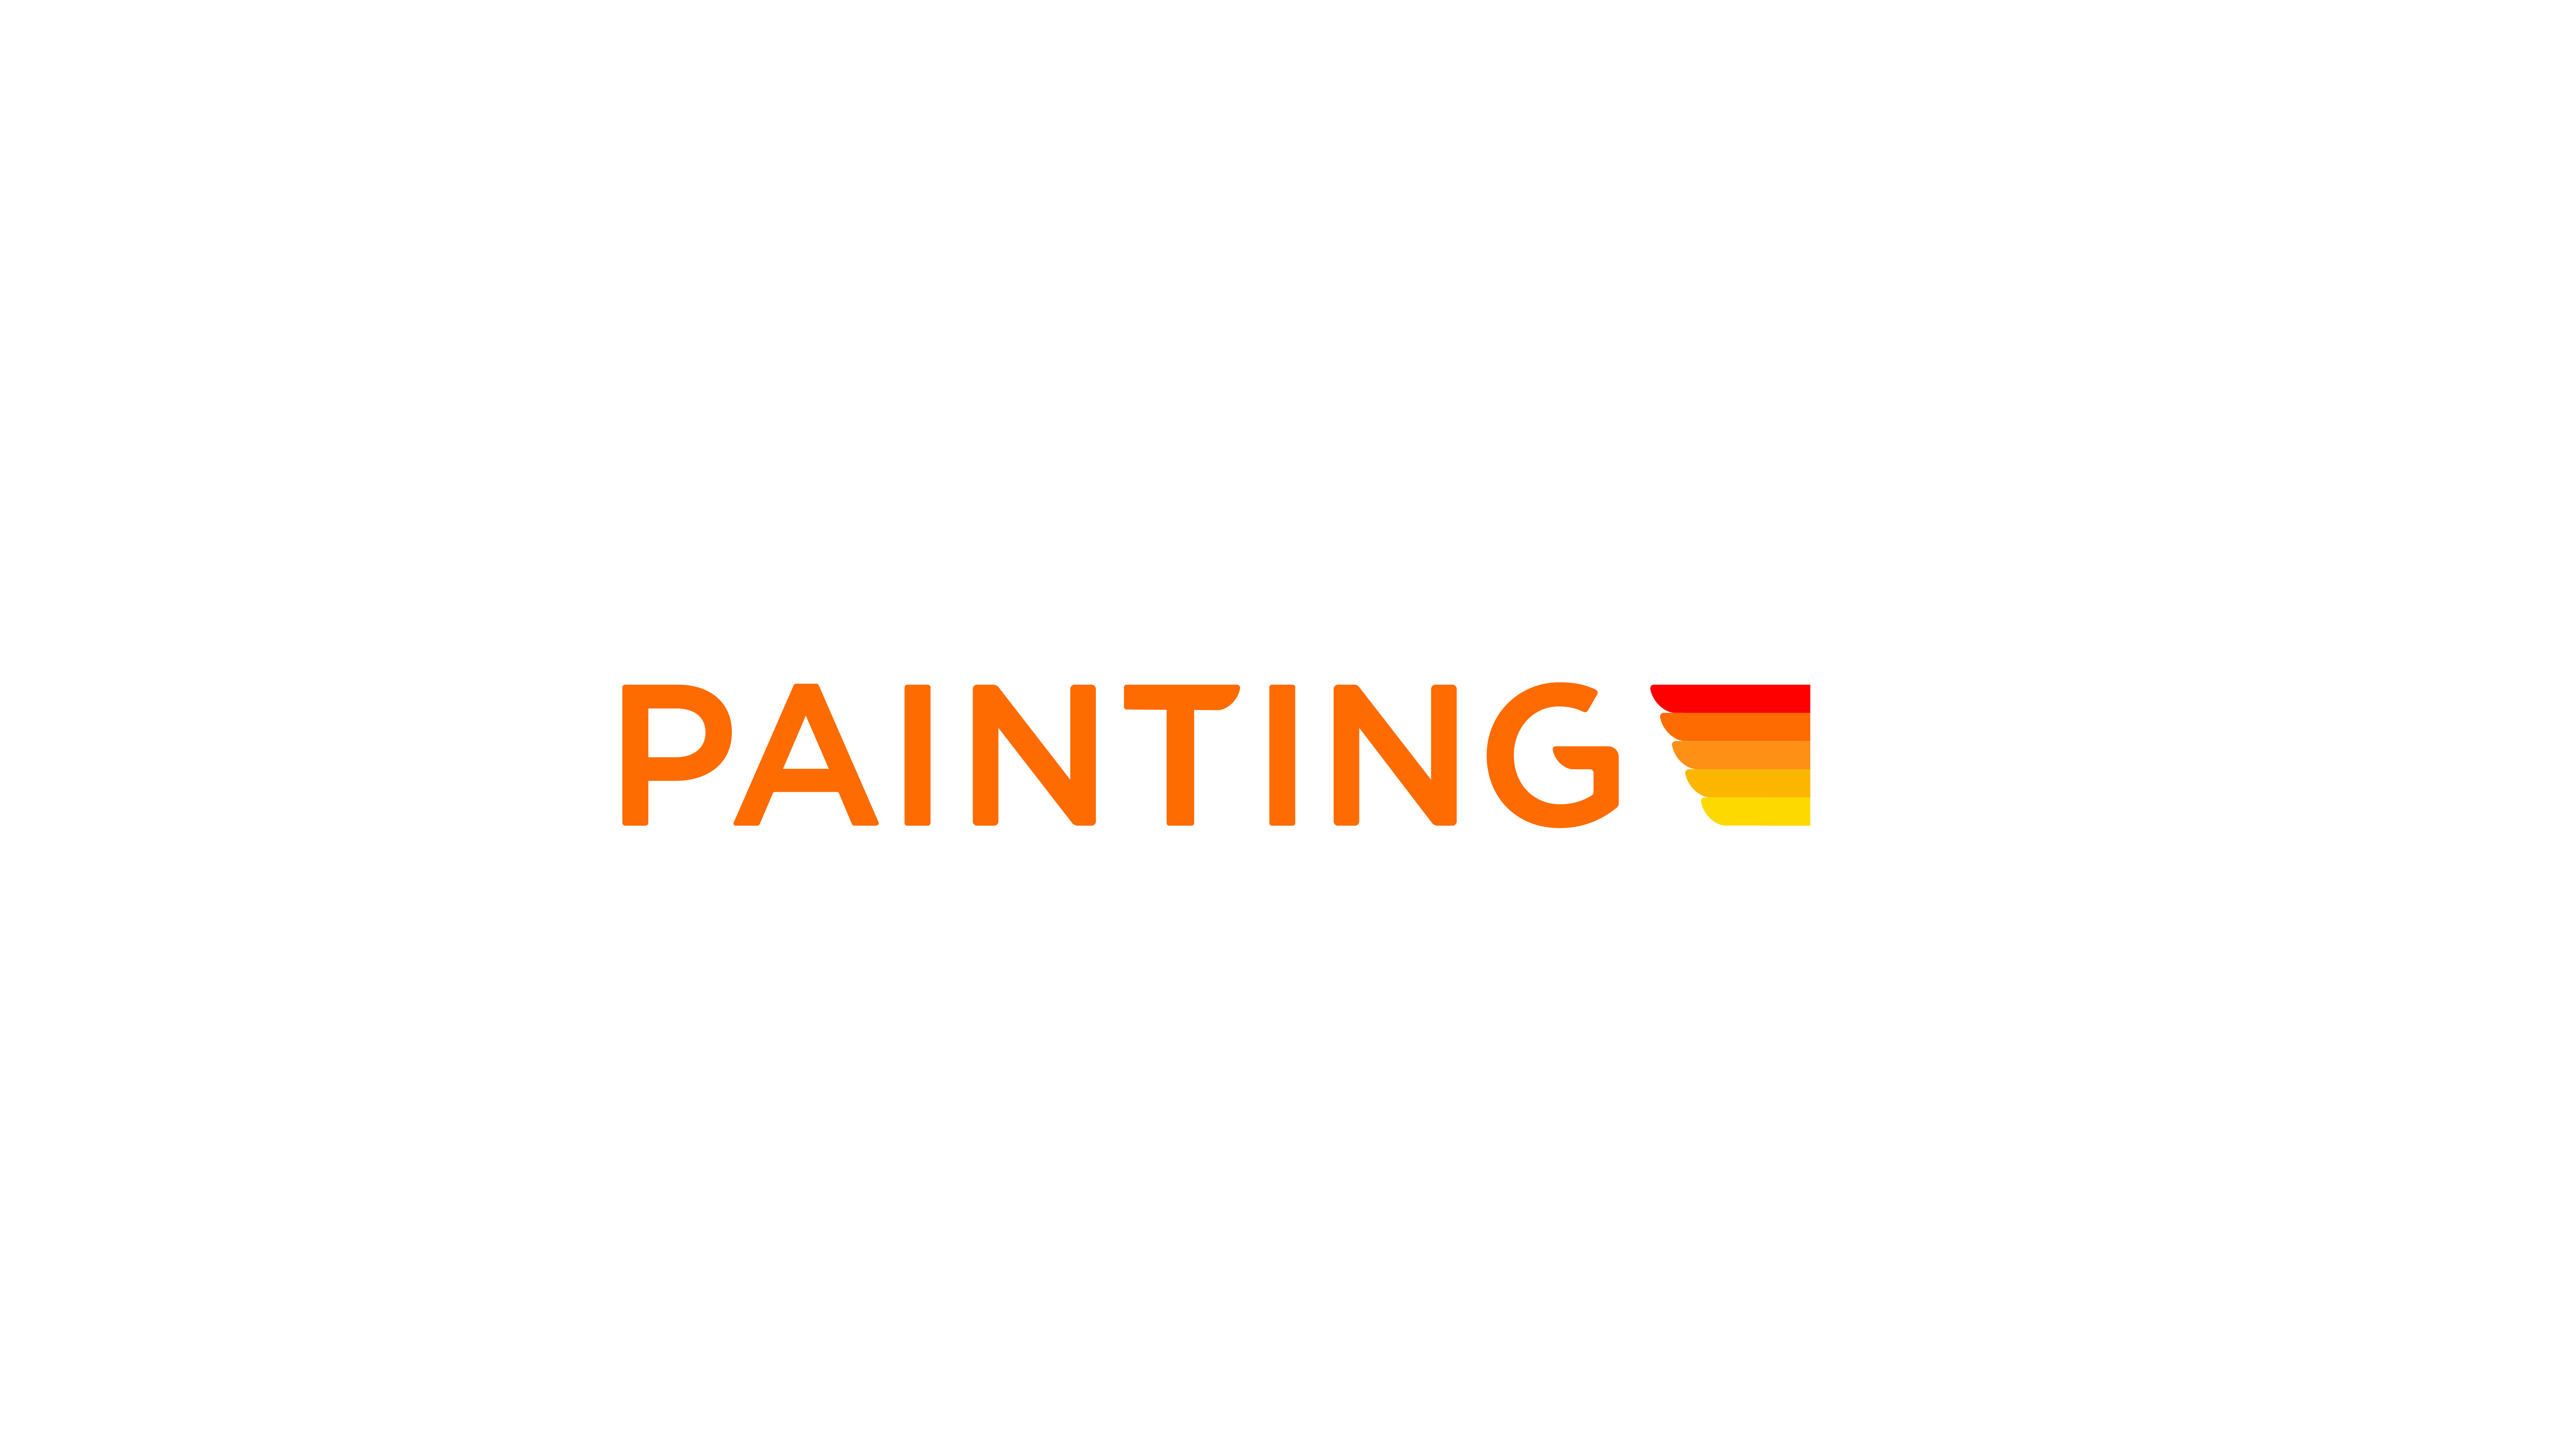 Five Star Painting of Edmonton NW